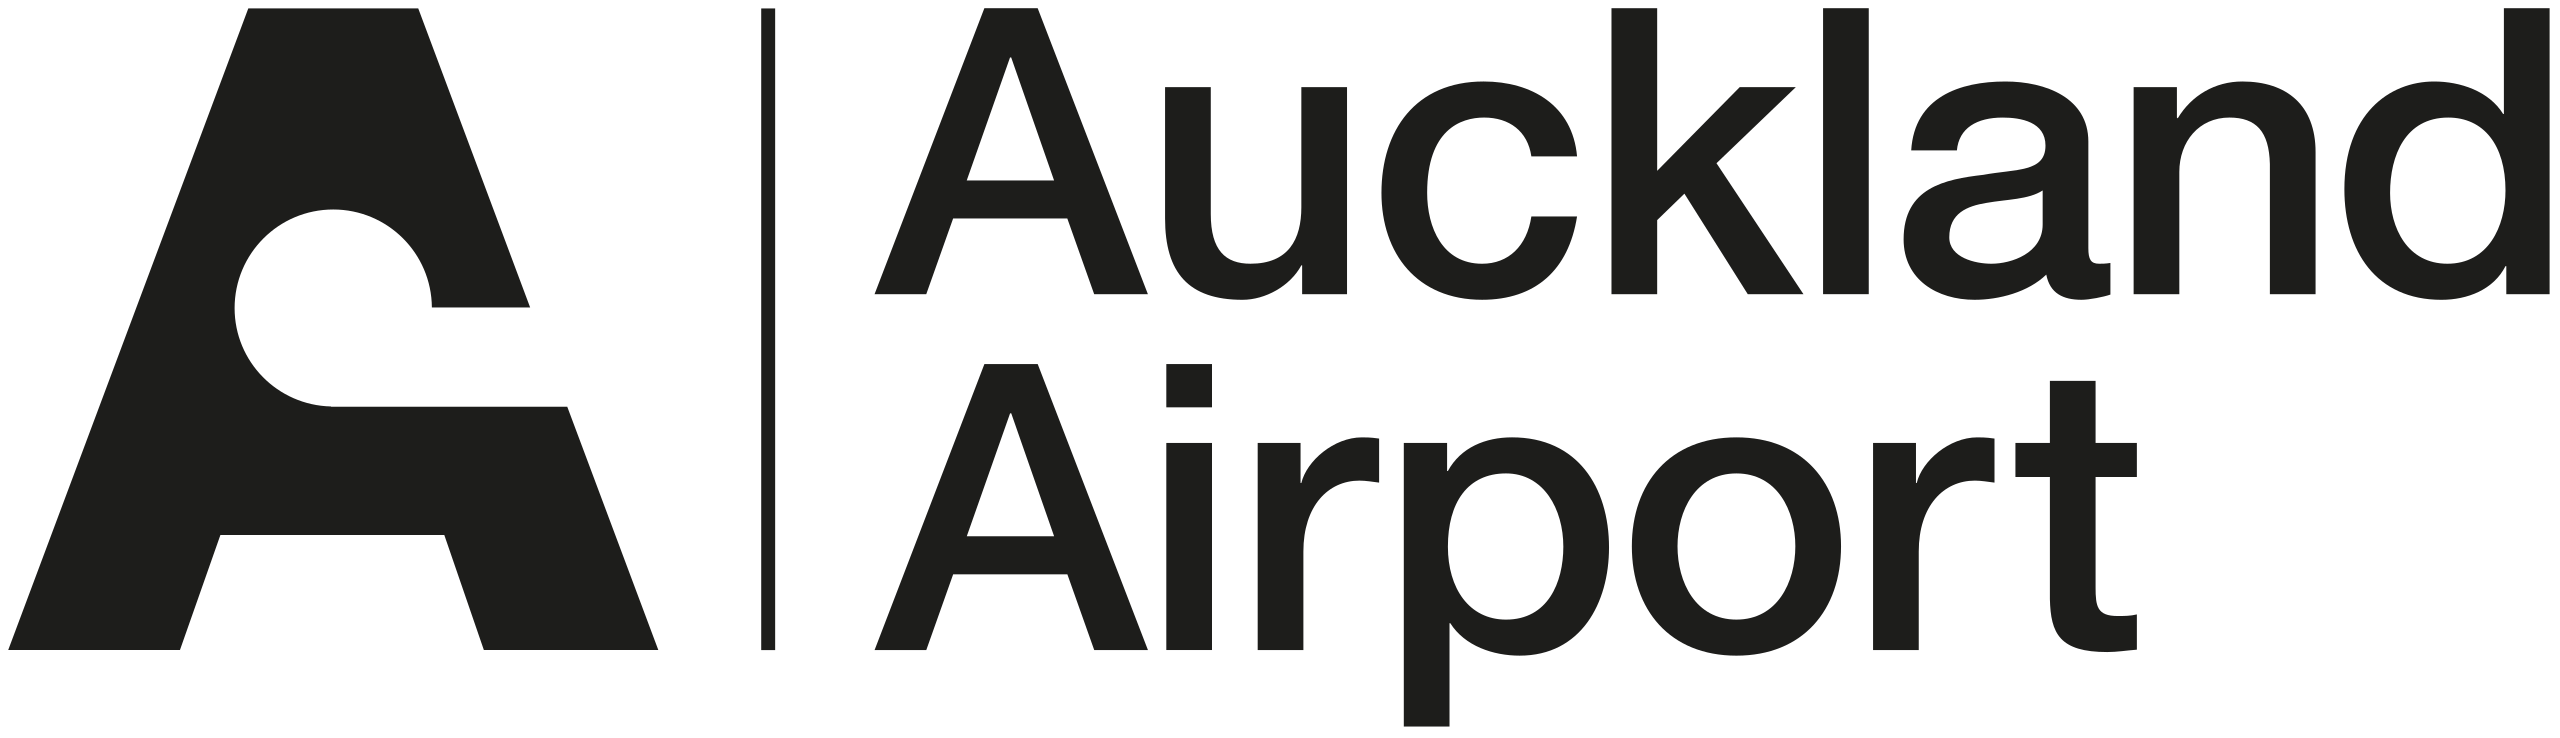 Auckland International Airport Limited